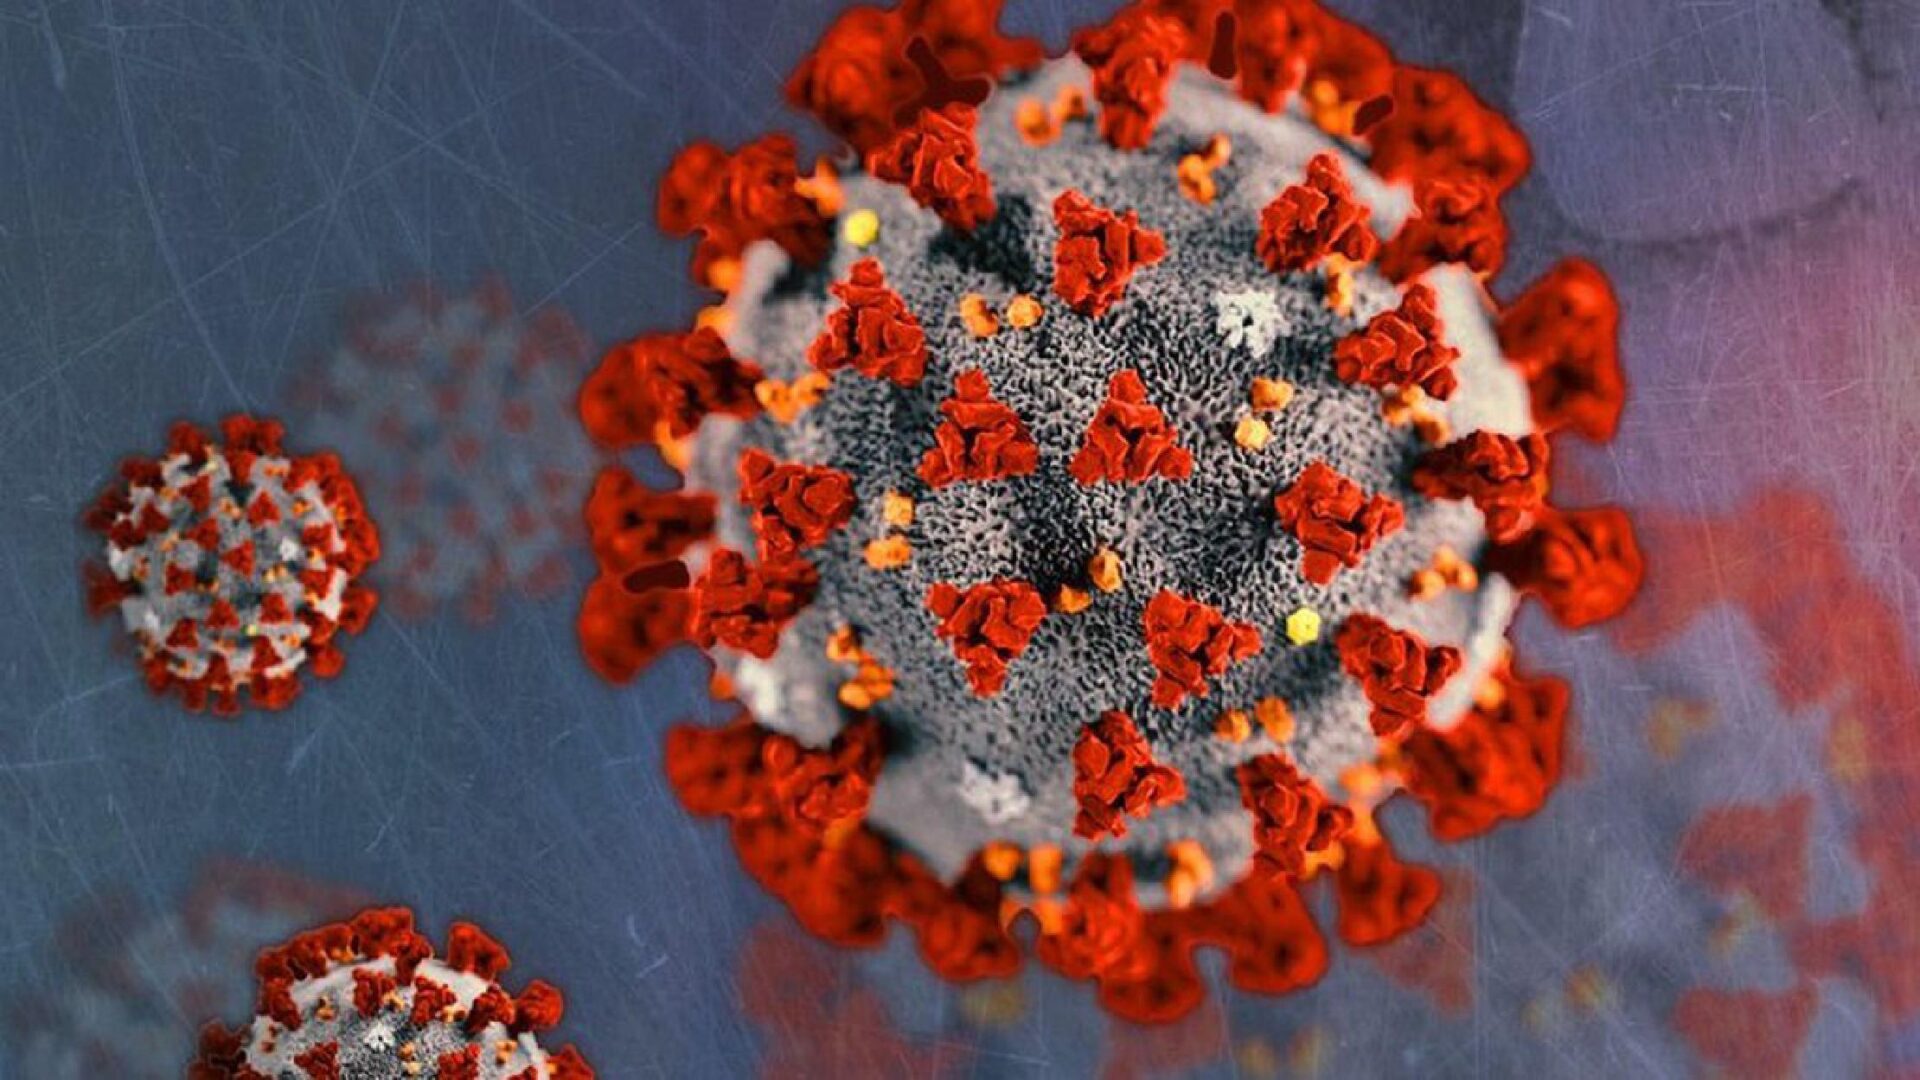 Microscopic view of a coronavirus particle with other particles in the background